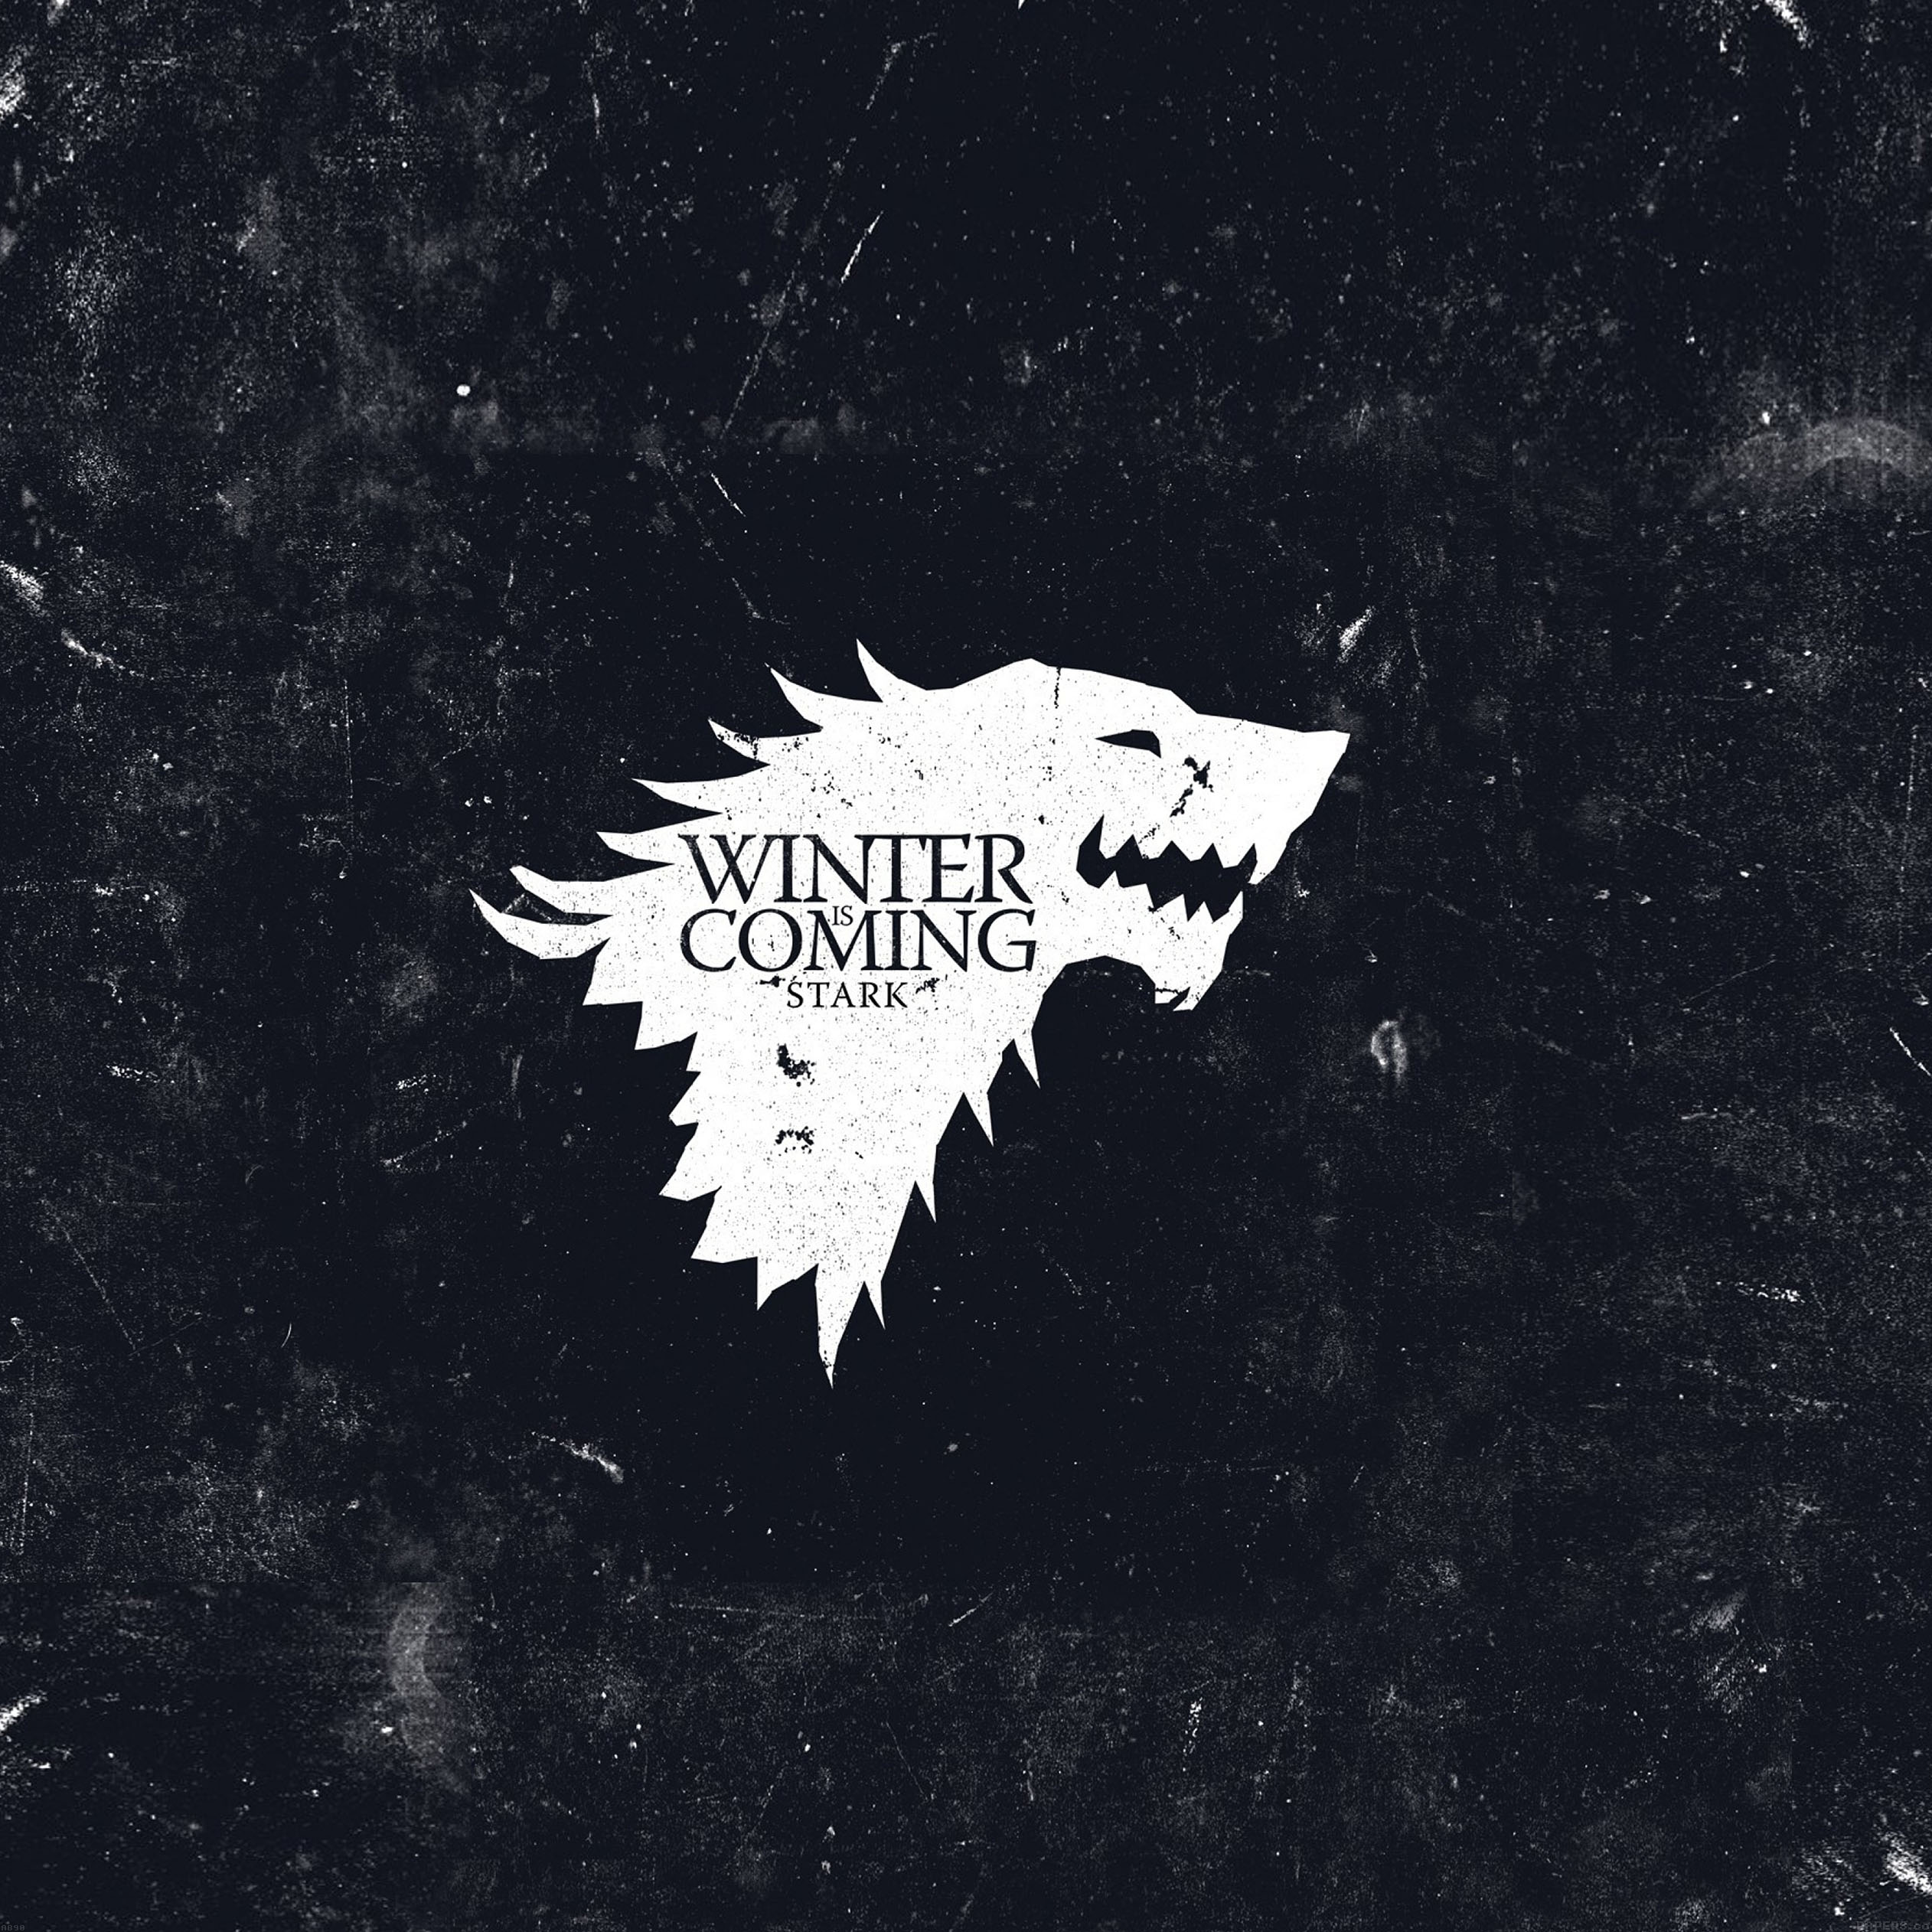 Game of Thrones wallpapers for iPhone